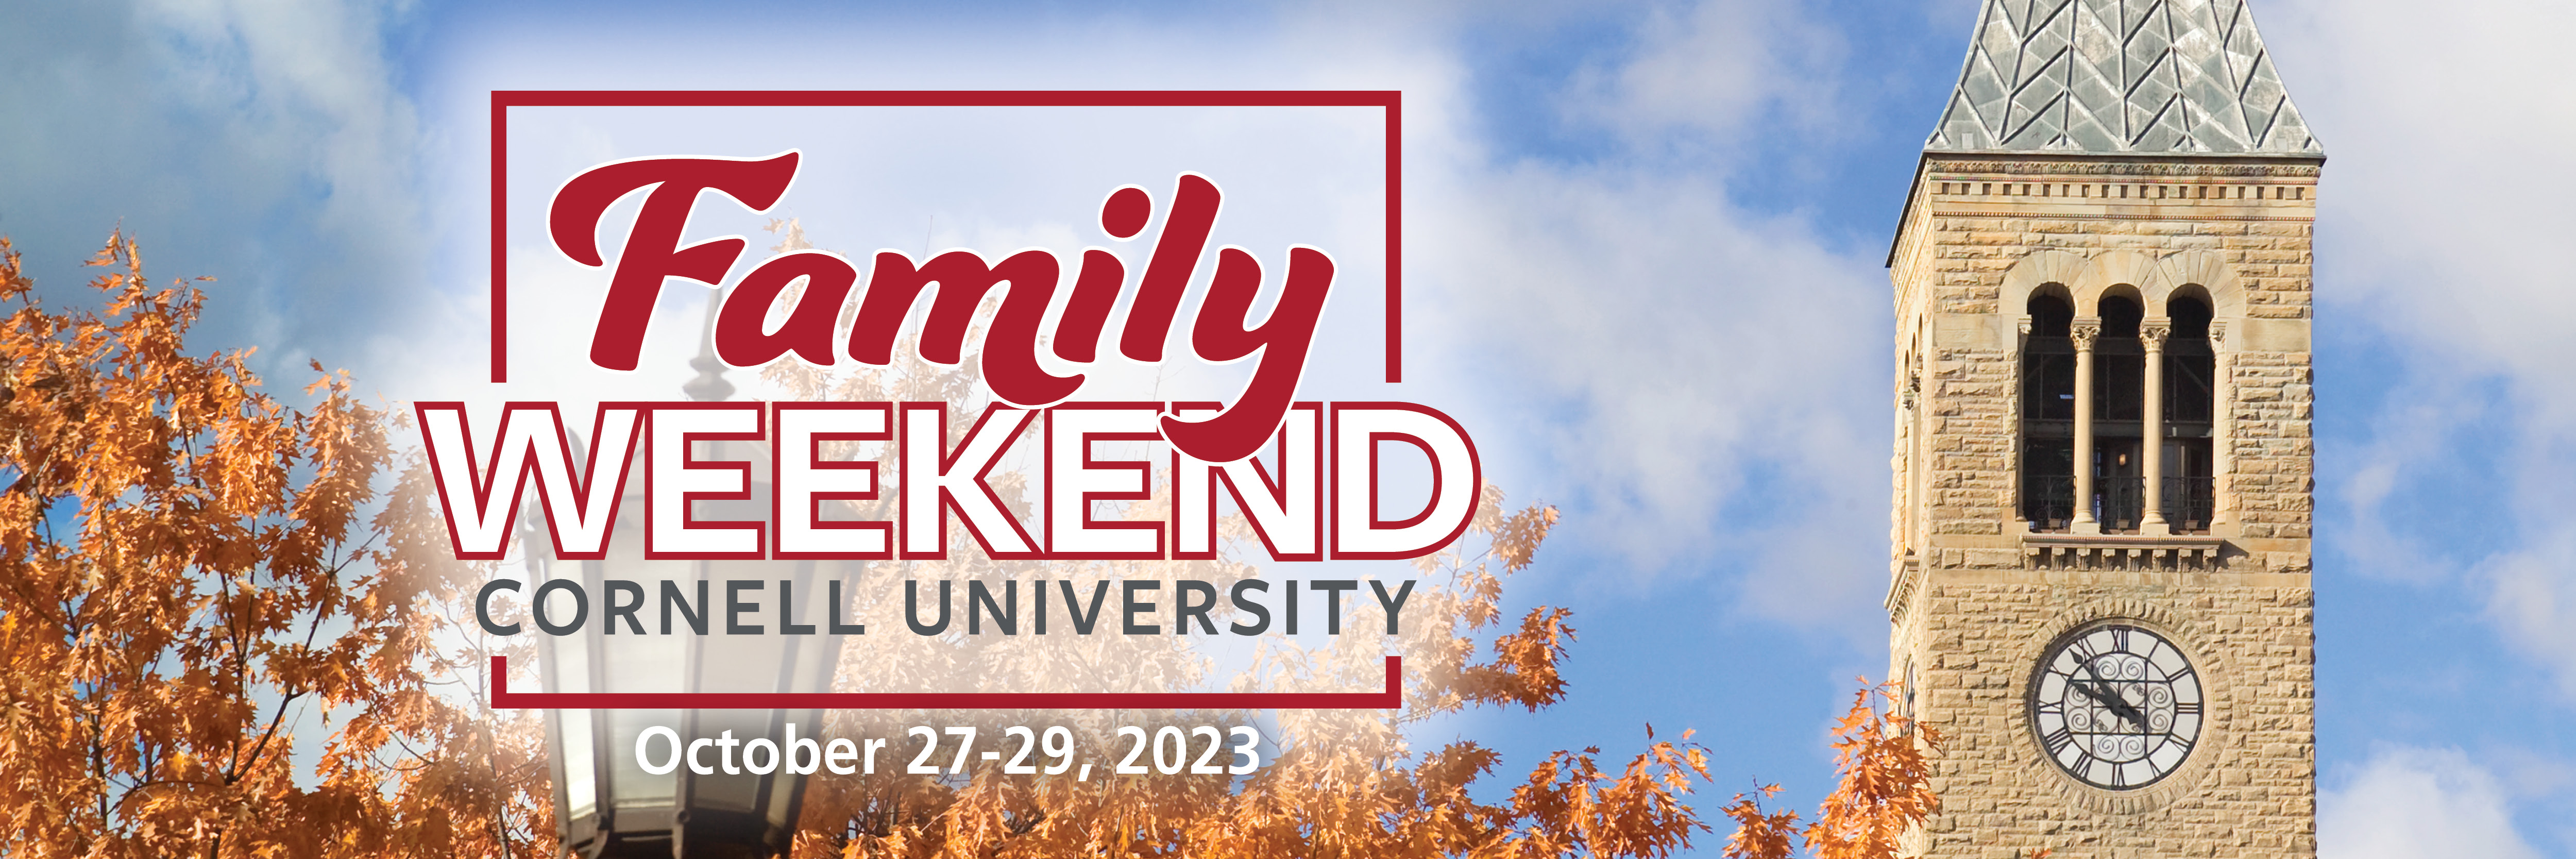 Family Weekend October 27-29, 2023 